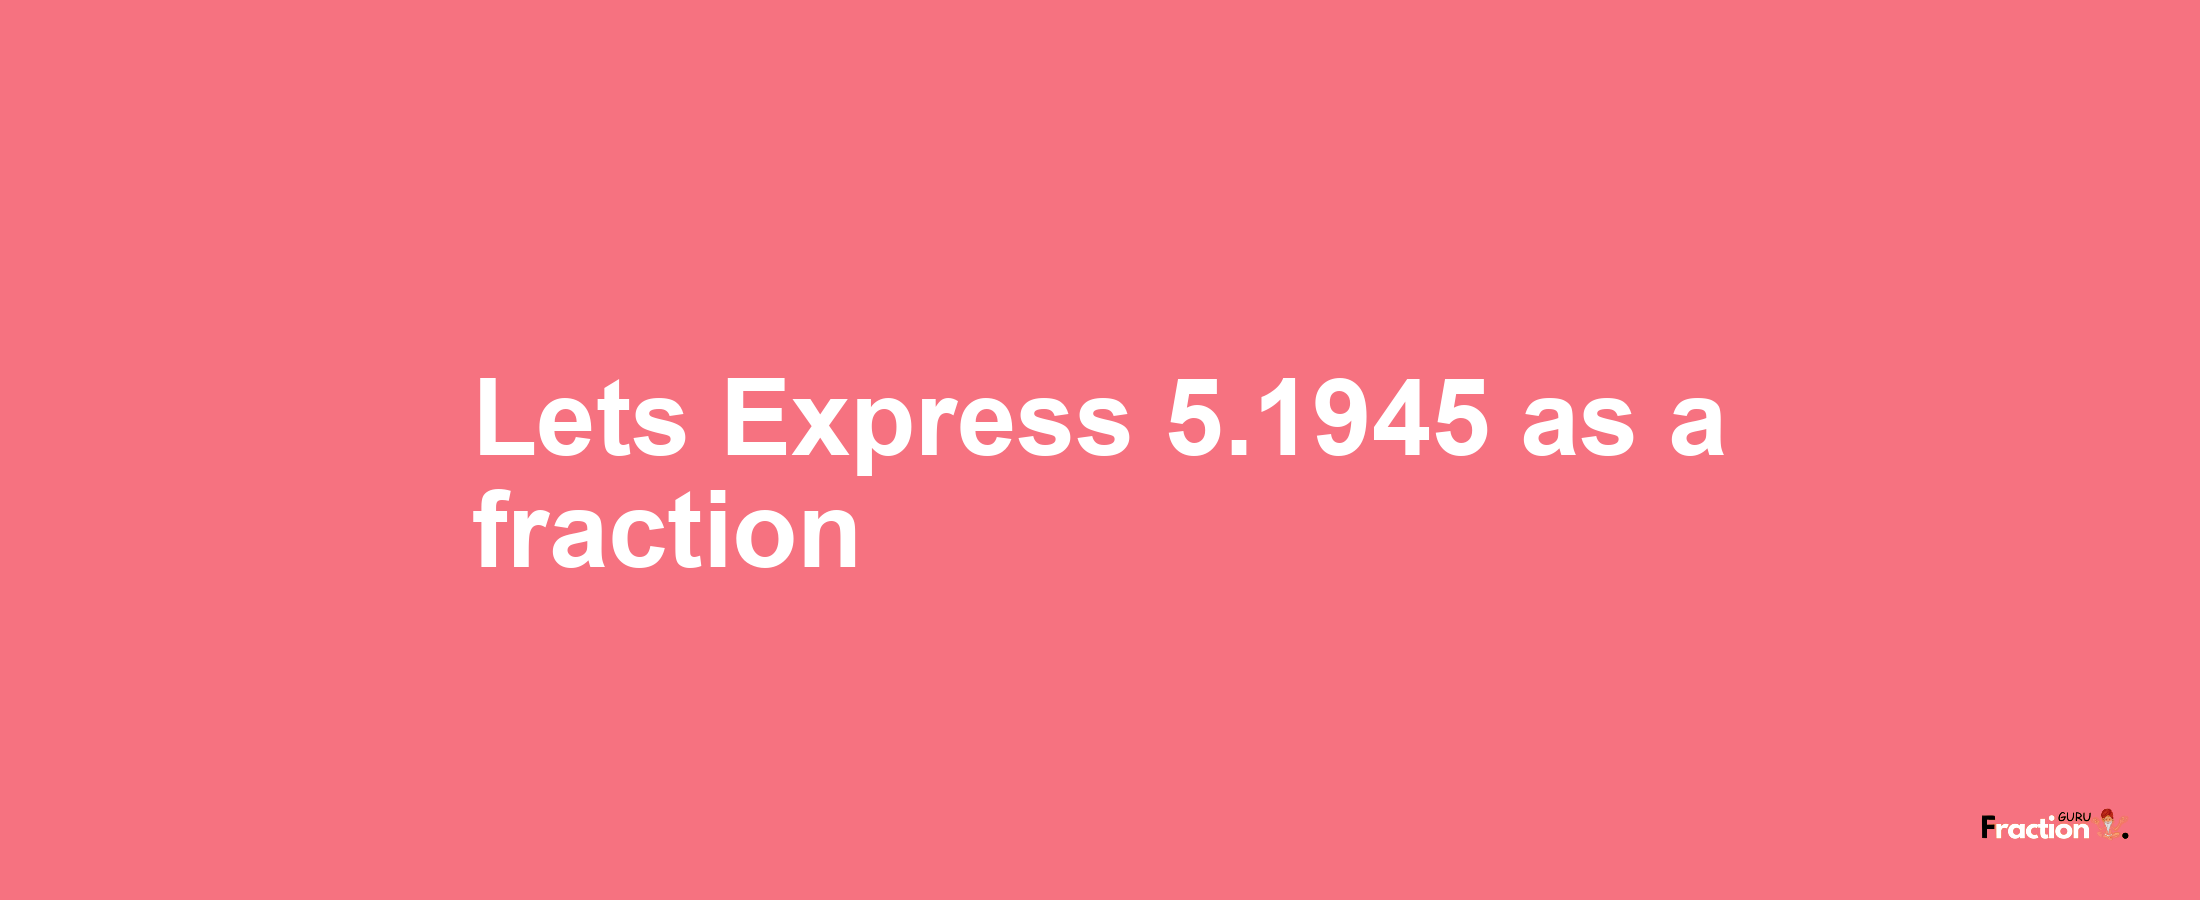 Lets Express 5.1945 as afraction